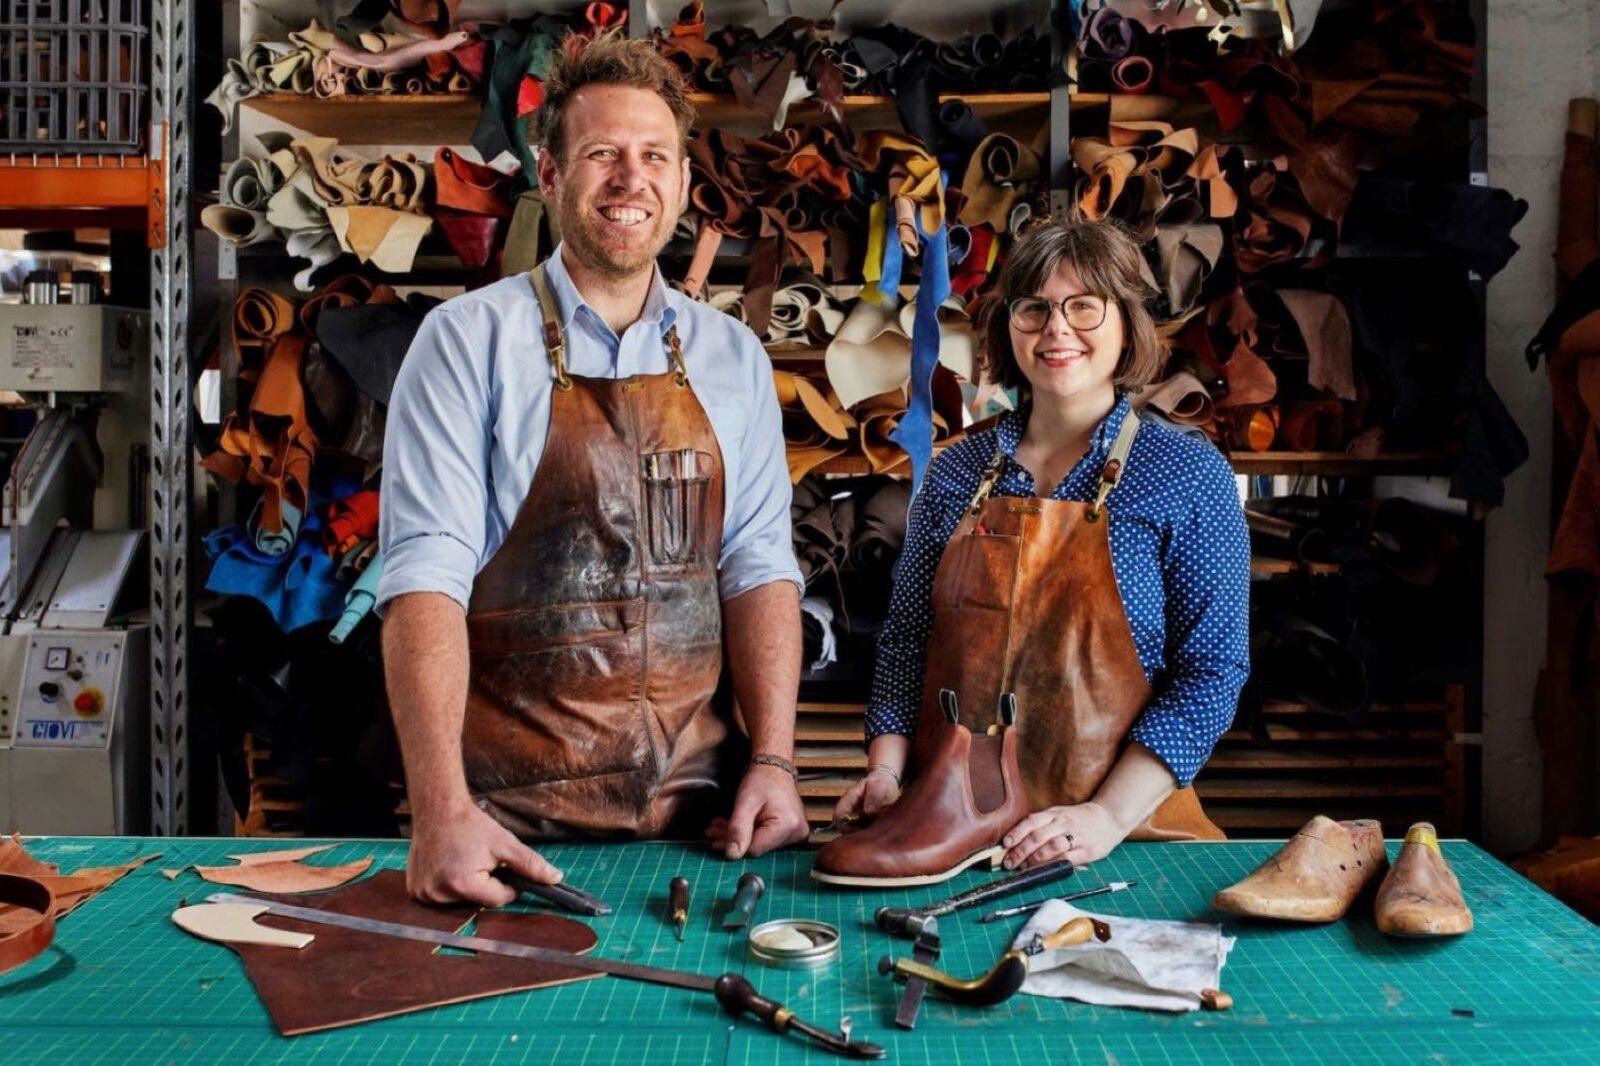 Jess and Krystina standing in front of leather storage with tools laid out on table in front